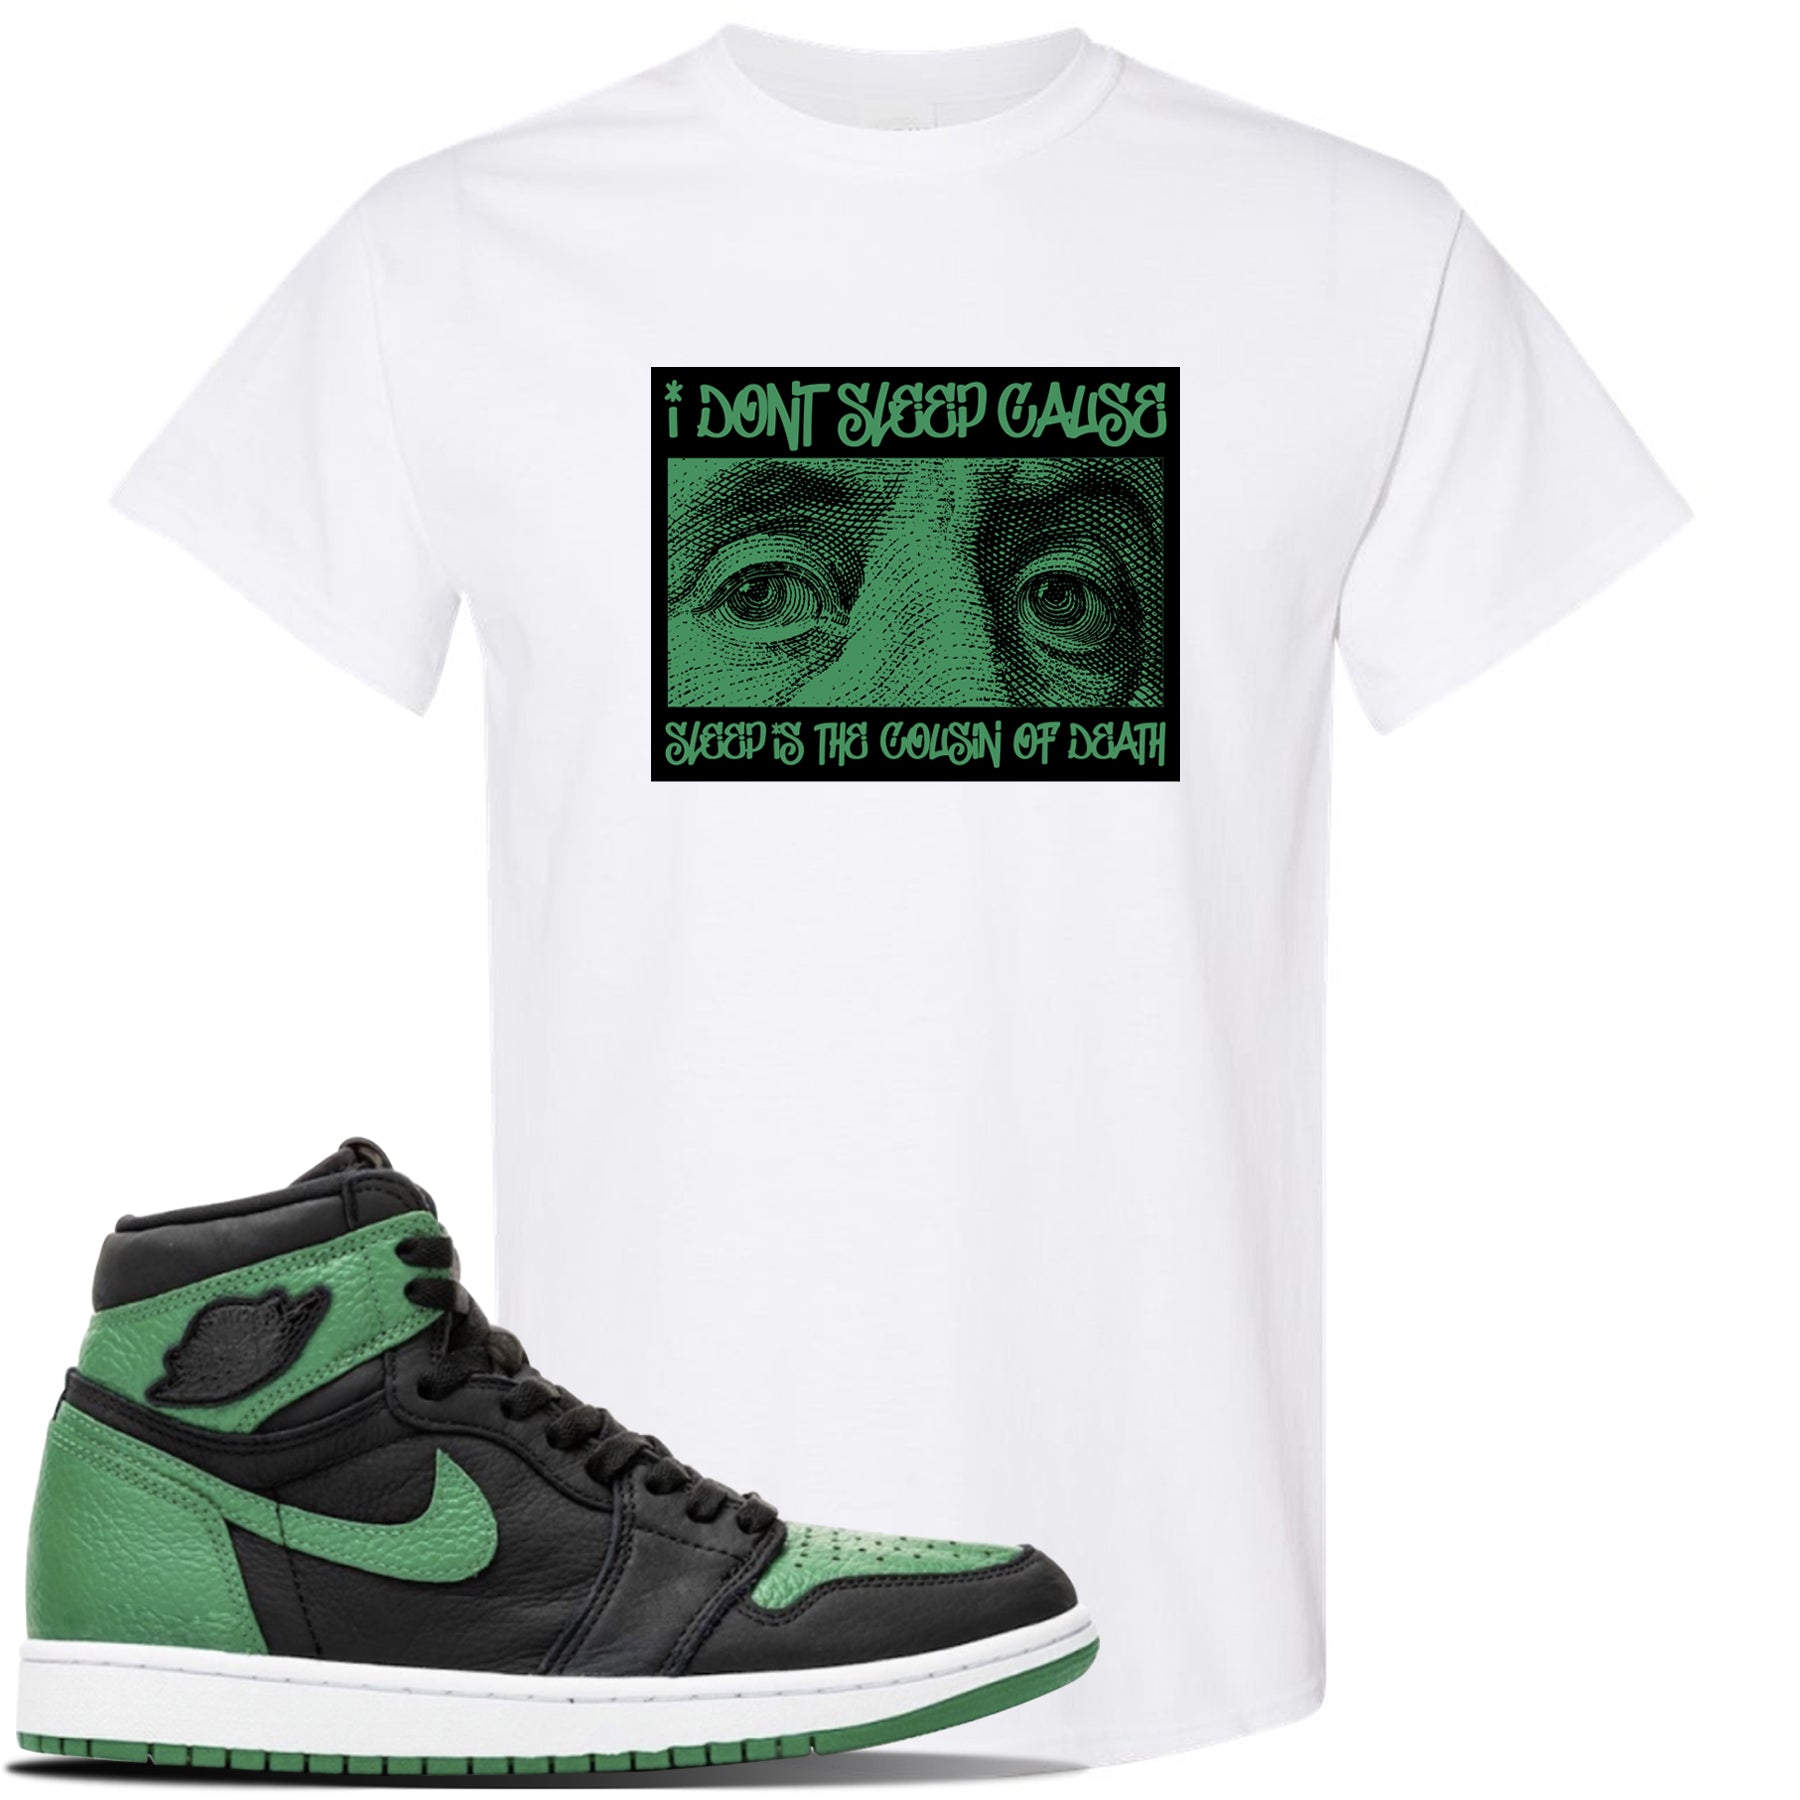 shirt to go with pine green 1s